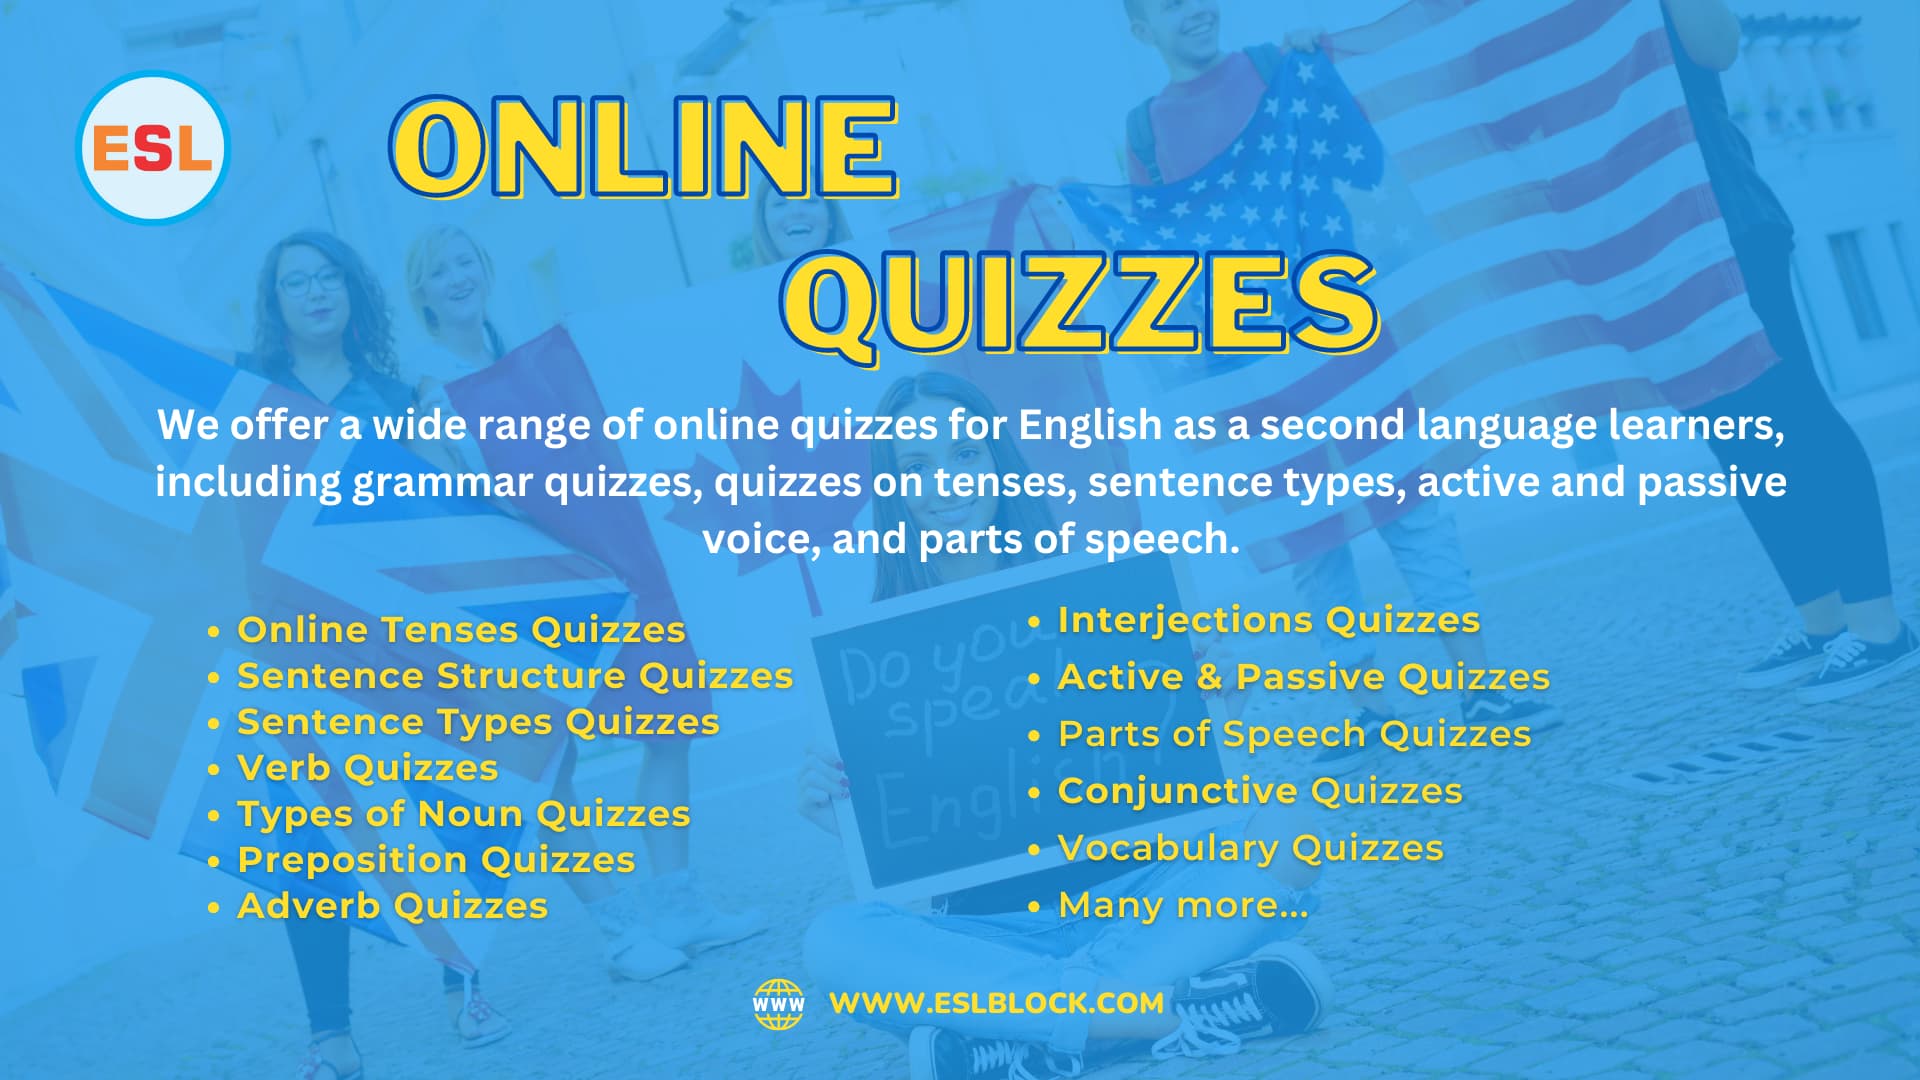 English as a Second Language - Online Quizzes